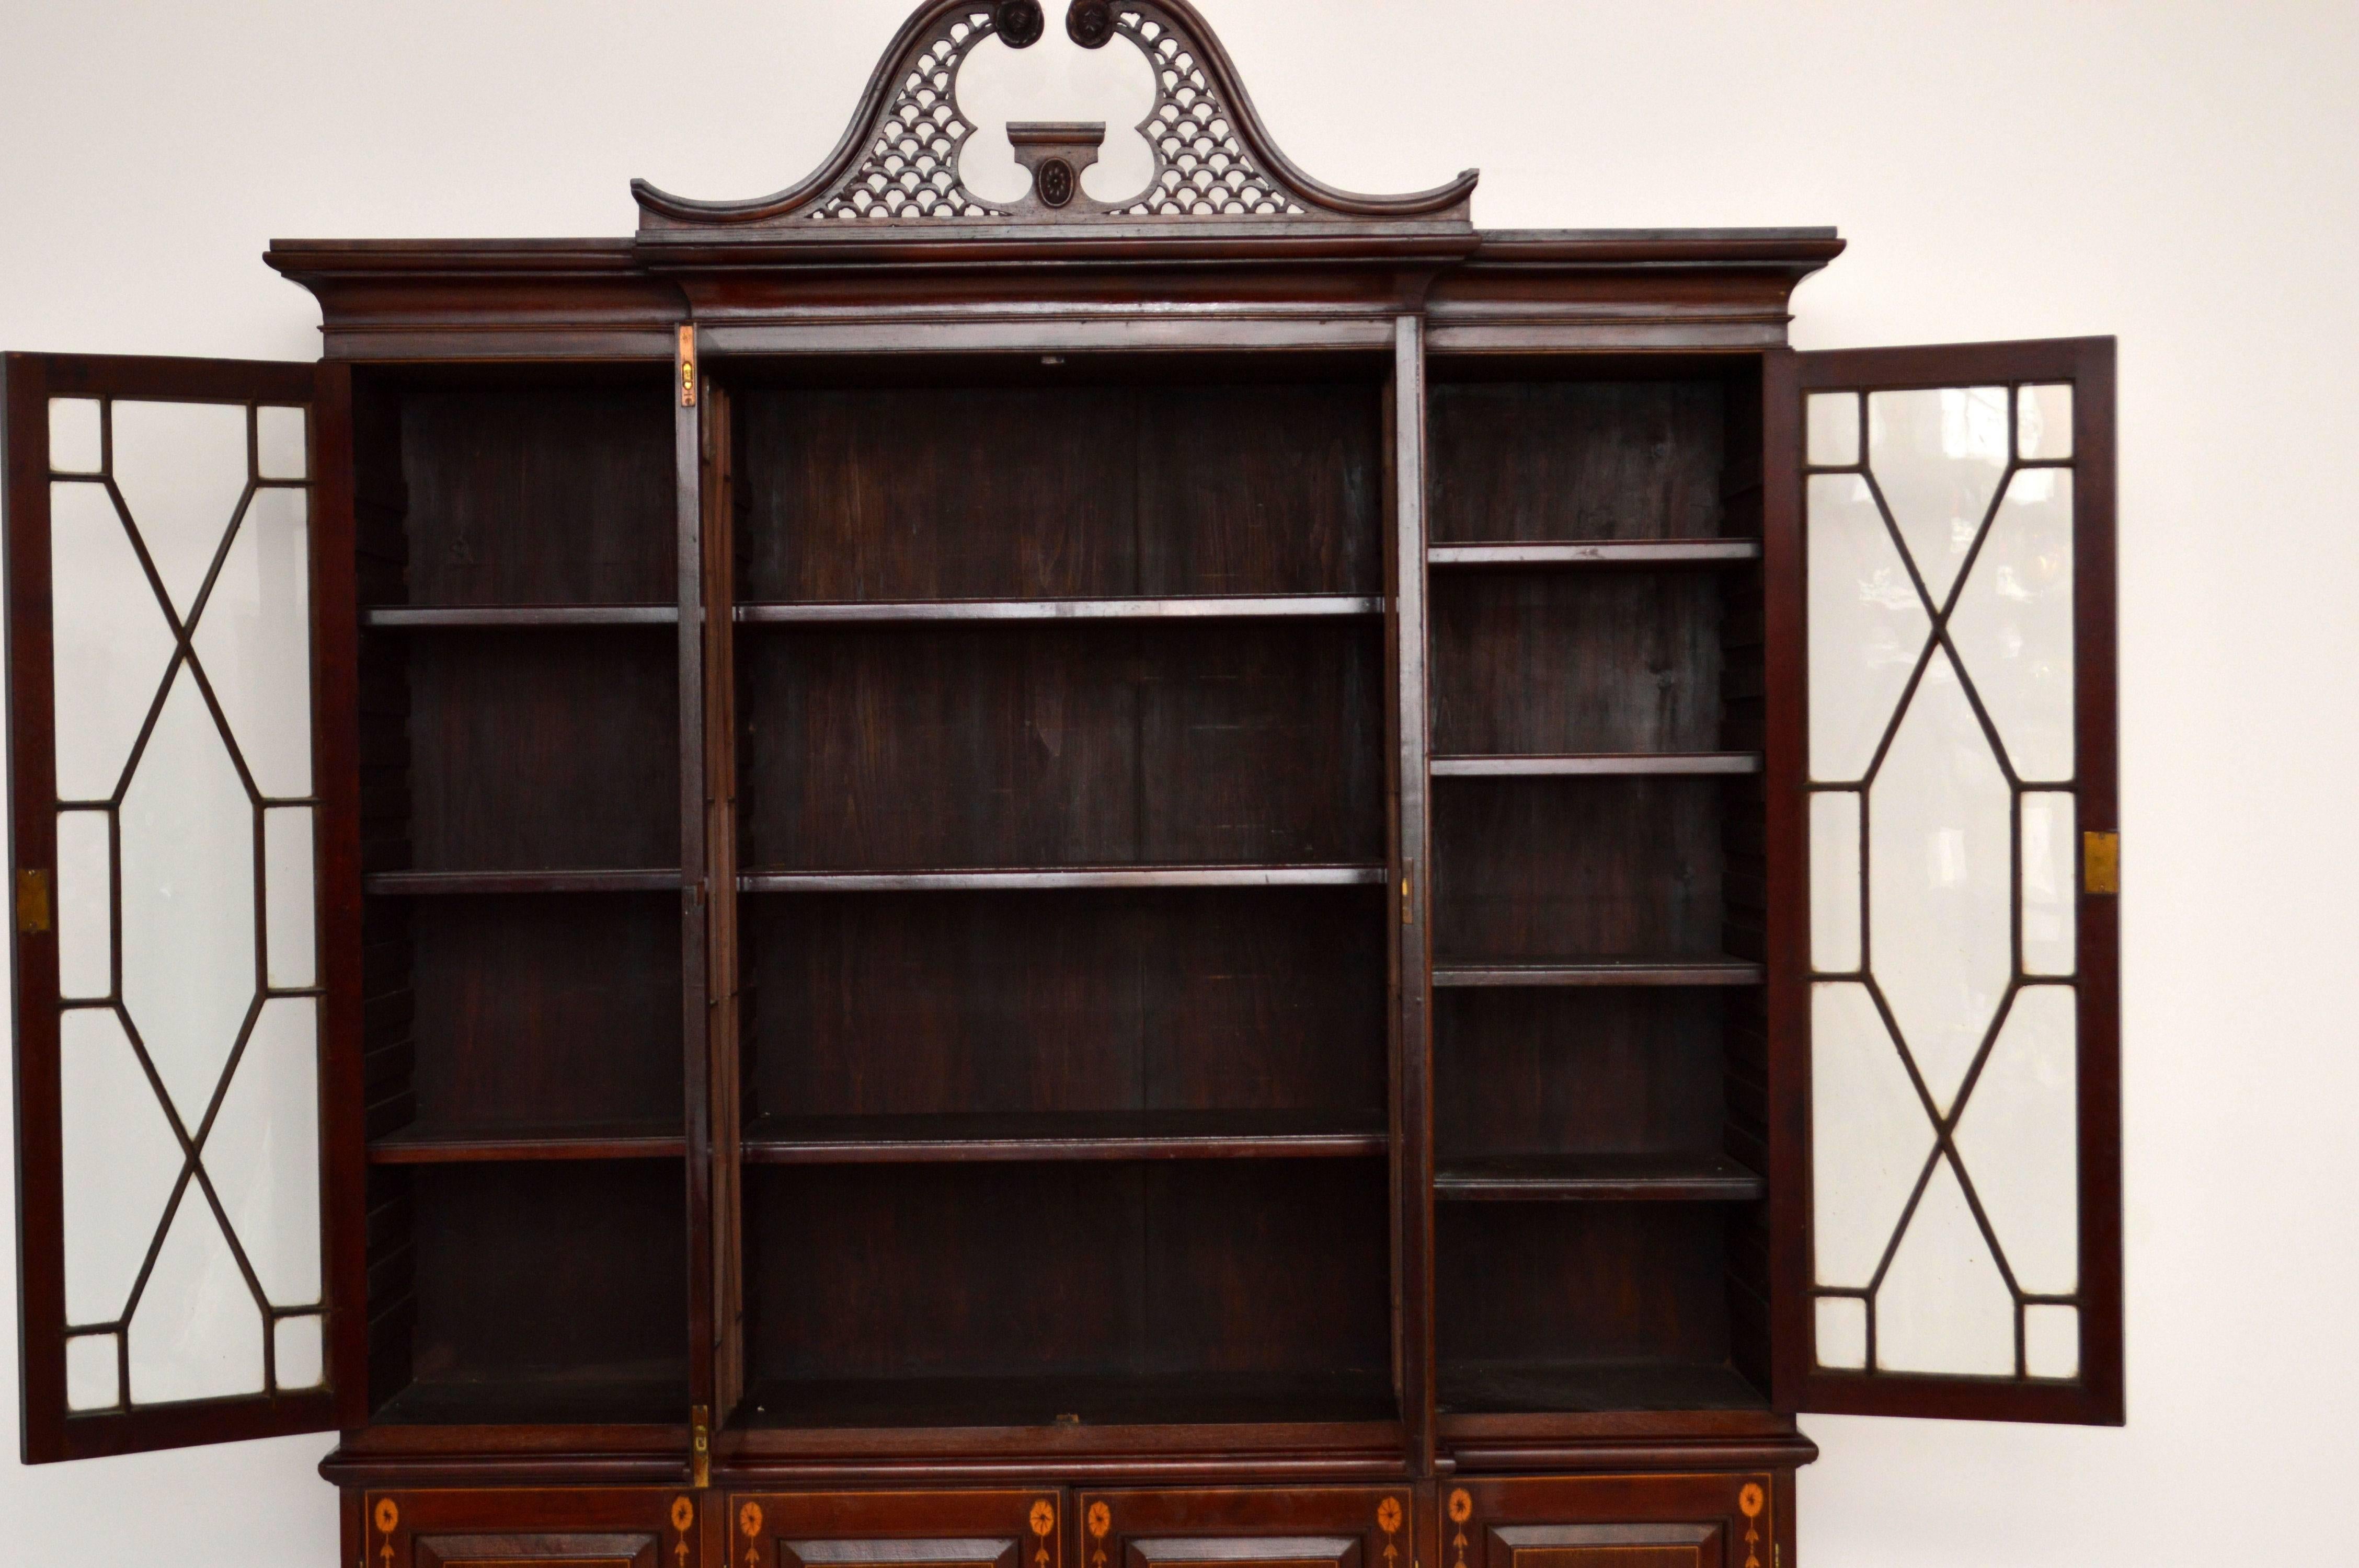 This large antique Edwardian mahogany breakfront bookcase is wonderful quality and has fine satinwood inlays all-over. Please enlarge all the images to appreciate all the fine details. The top pediment can be taken off if it makes the bookcase too